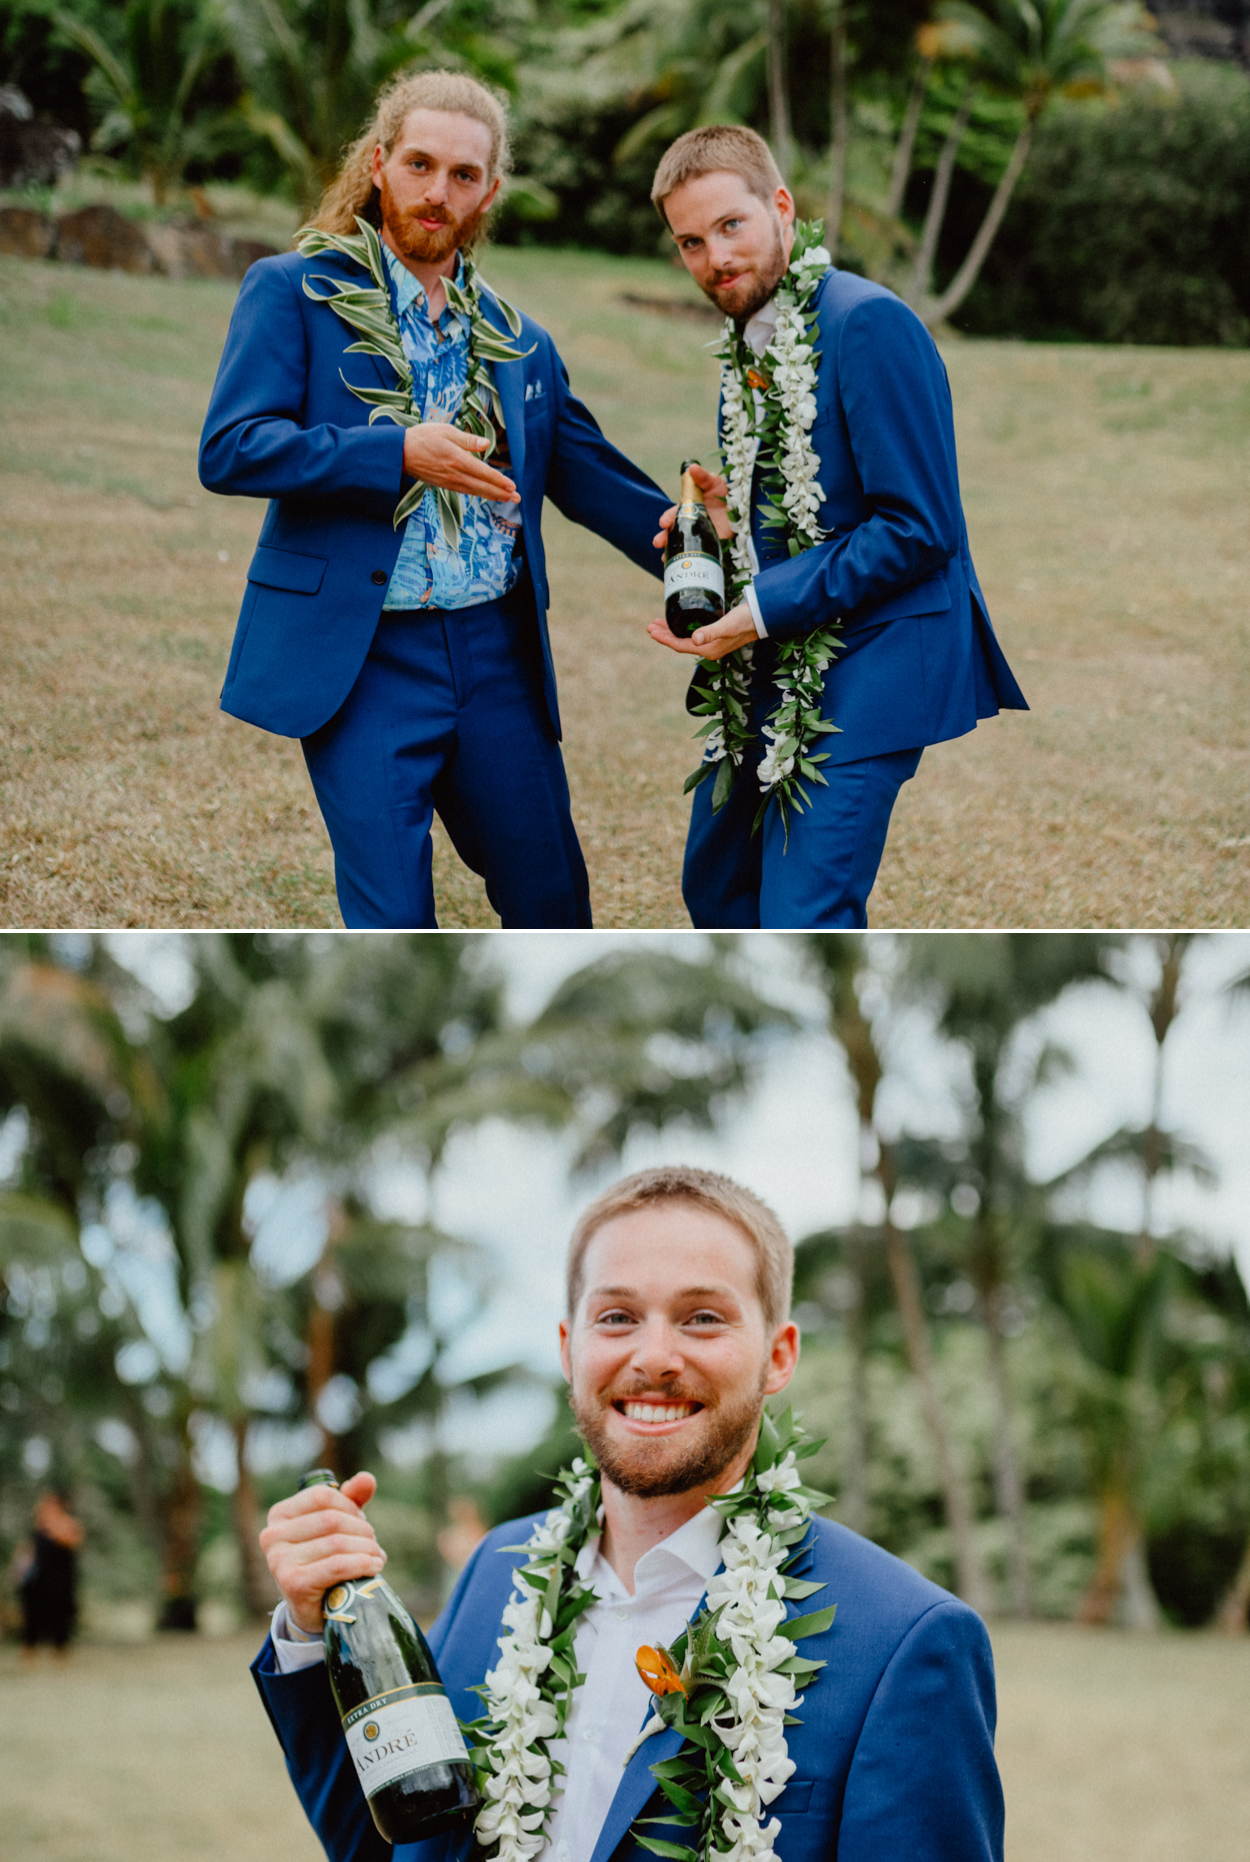 Groom and his brother with a bottle of champagne in Paliku Gardens Kualoa Ranch wedding with Koʻolau Range backdrop